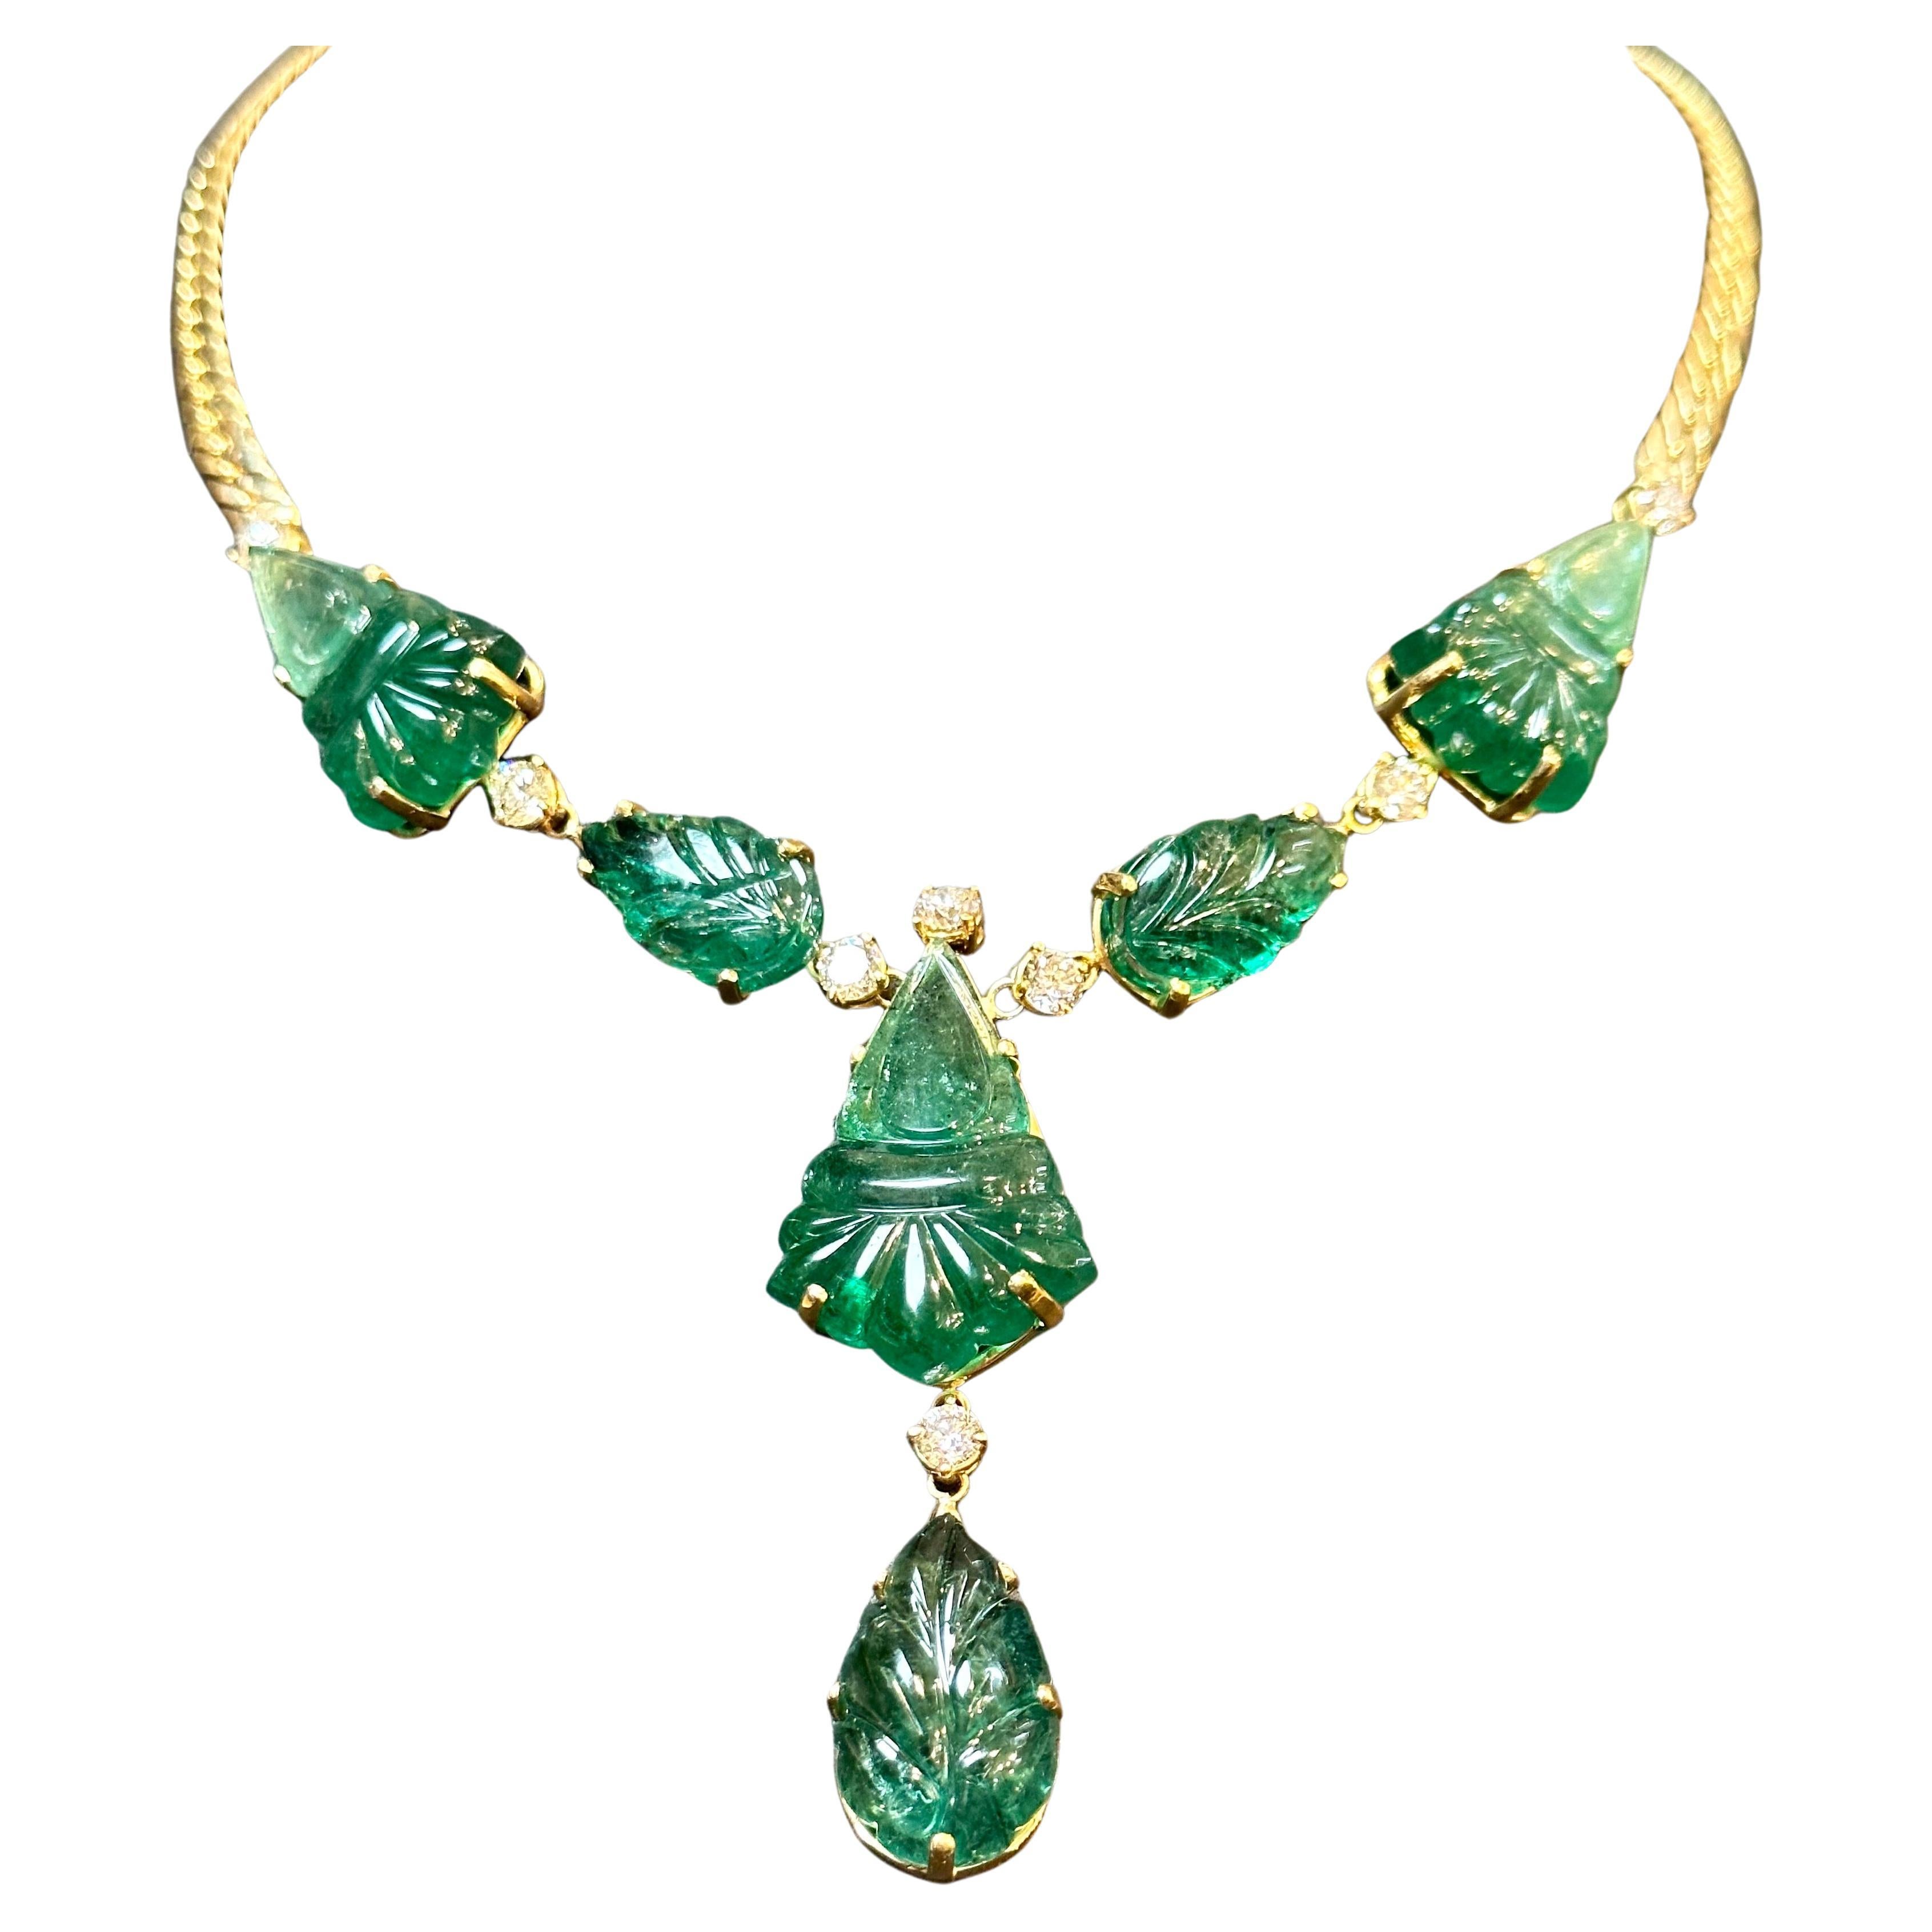 This stunning necklace features a remarkable combination of natural carved drop emeralds weighing 115 carats and 4 carats of solitaire diamonds. Crafted in 18 karat gold, the necklace showcases three intricately carved leaves and three larger pieces